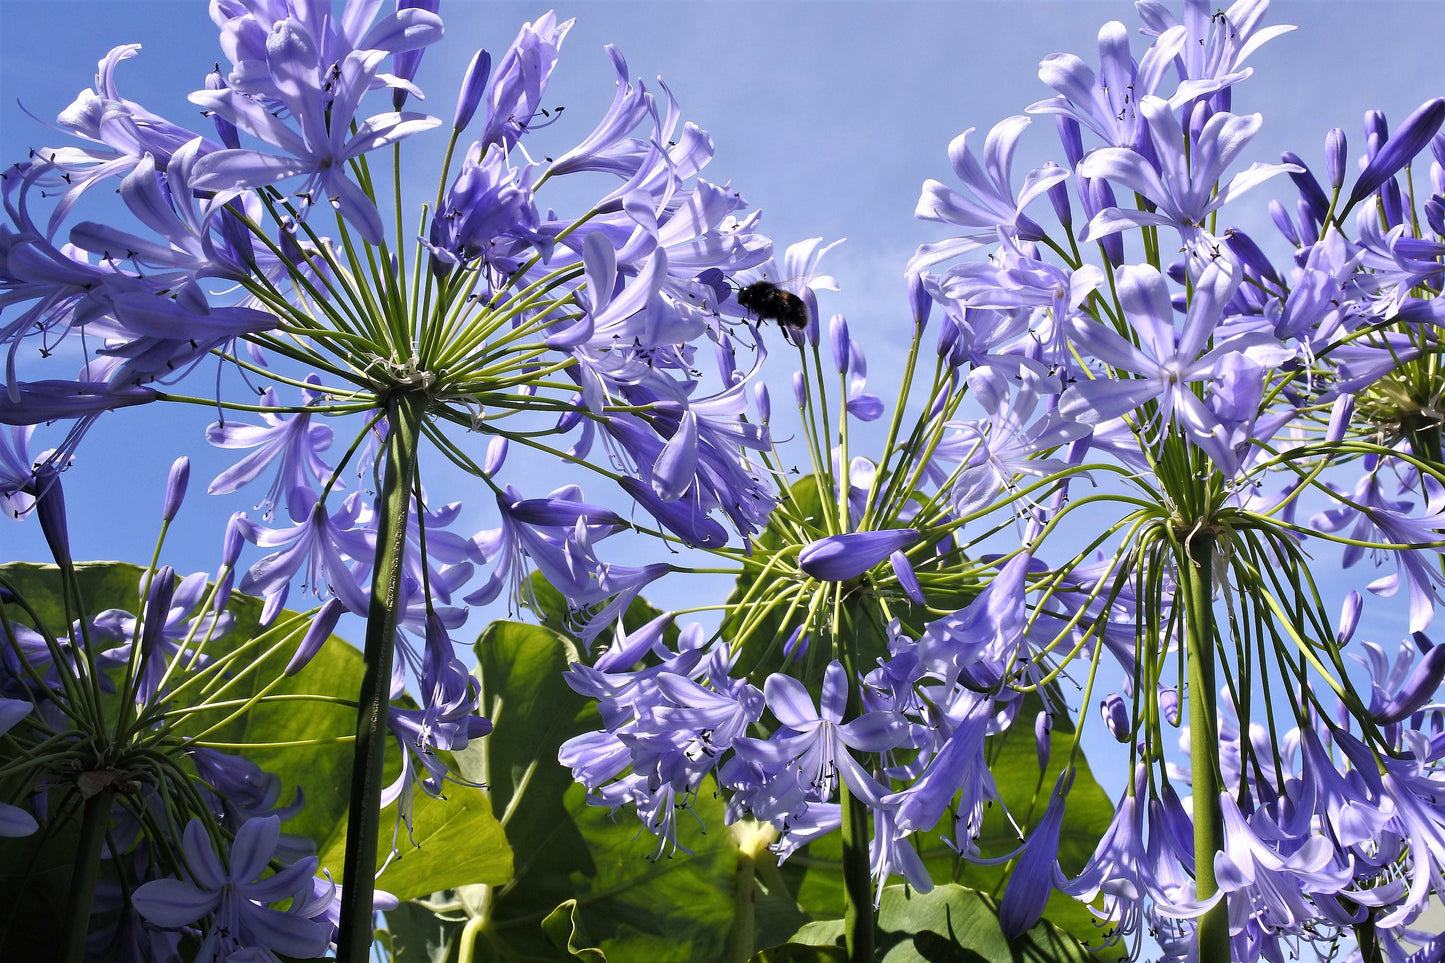 25 BLUE LILY of the NILE Agapanthus Orientalis African Lily Flower Seeds